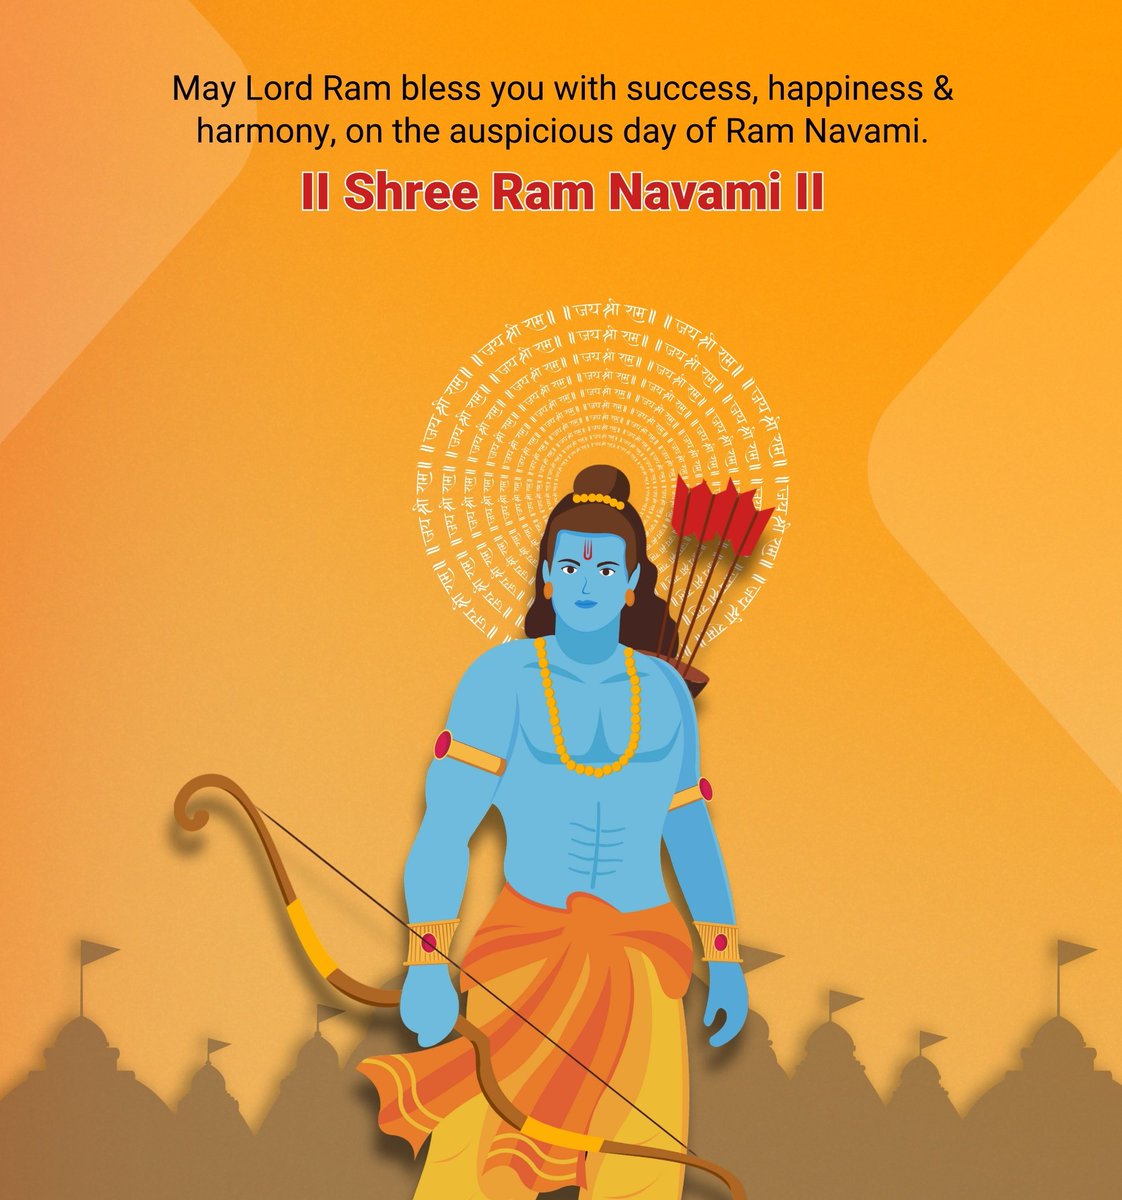 May the divine blessings of Lord Rama be with you and fill your life with happiness and prosperity. Happy Ram Navami! #Ramayana